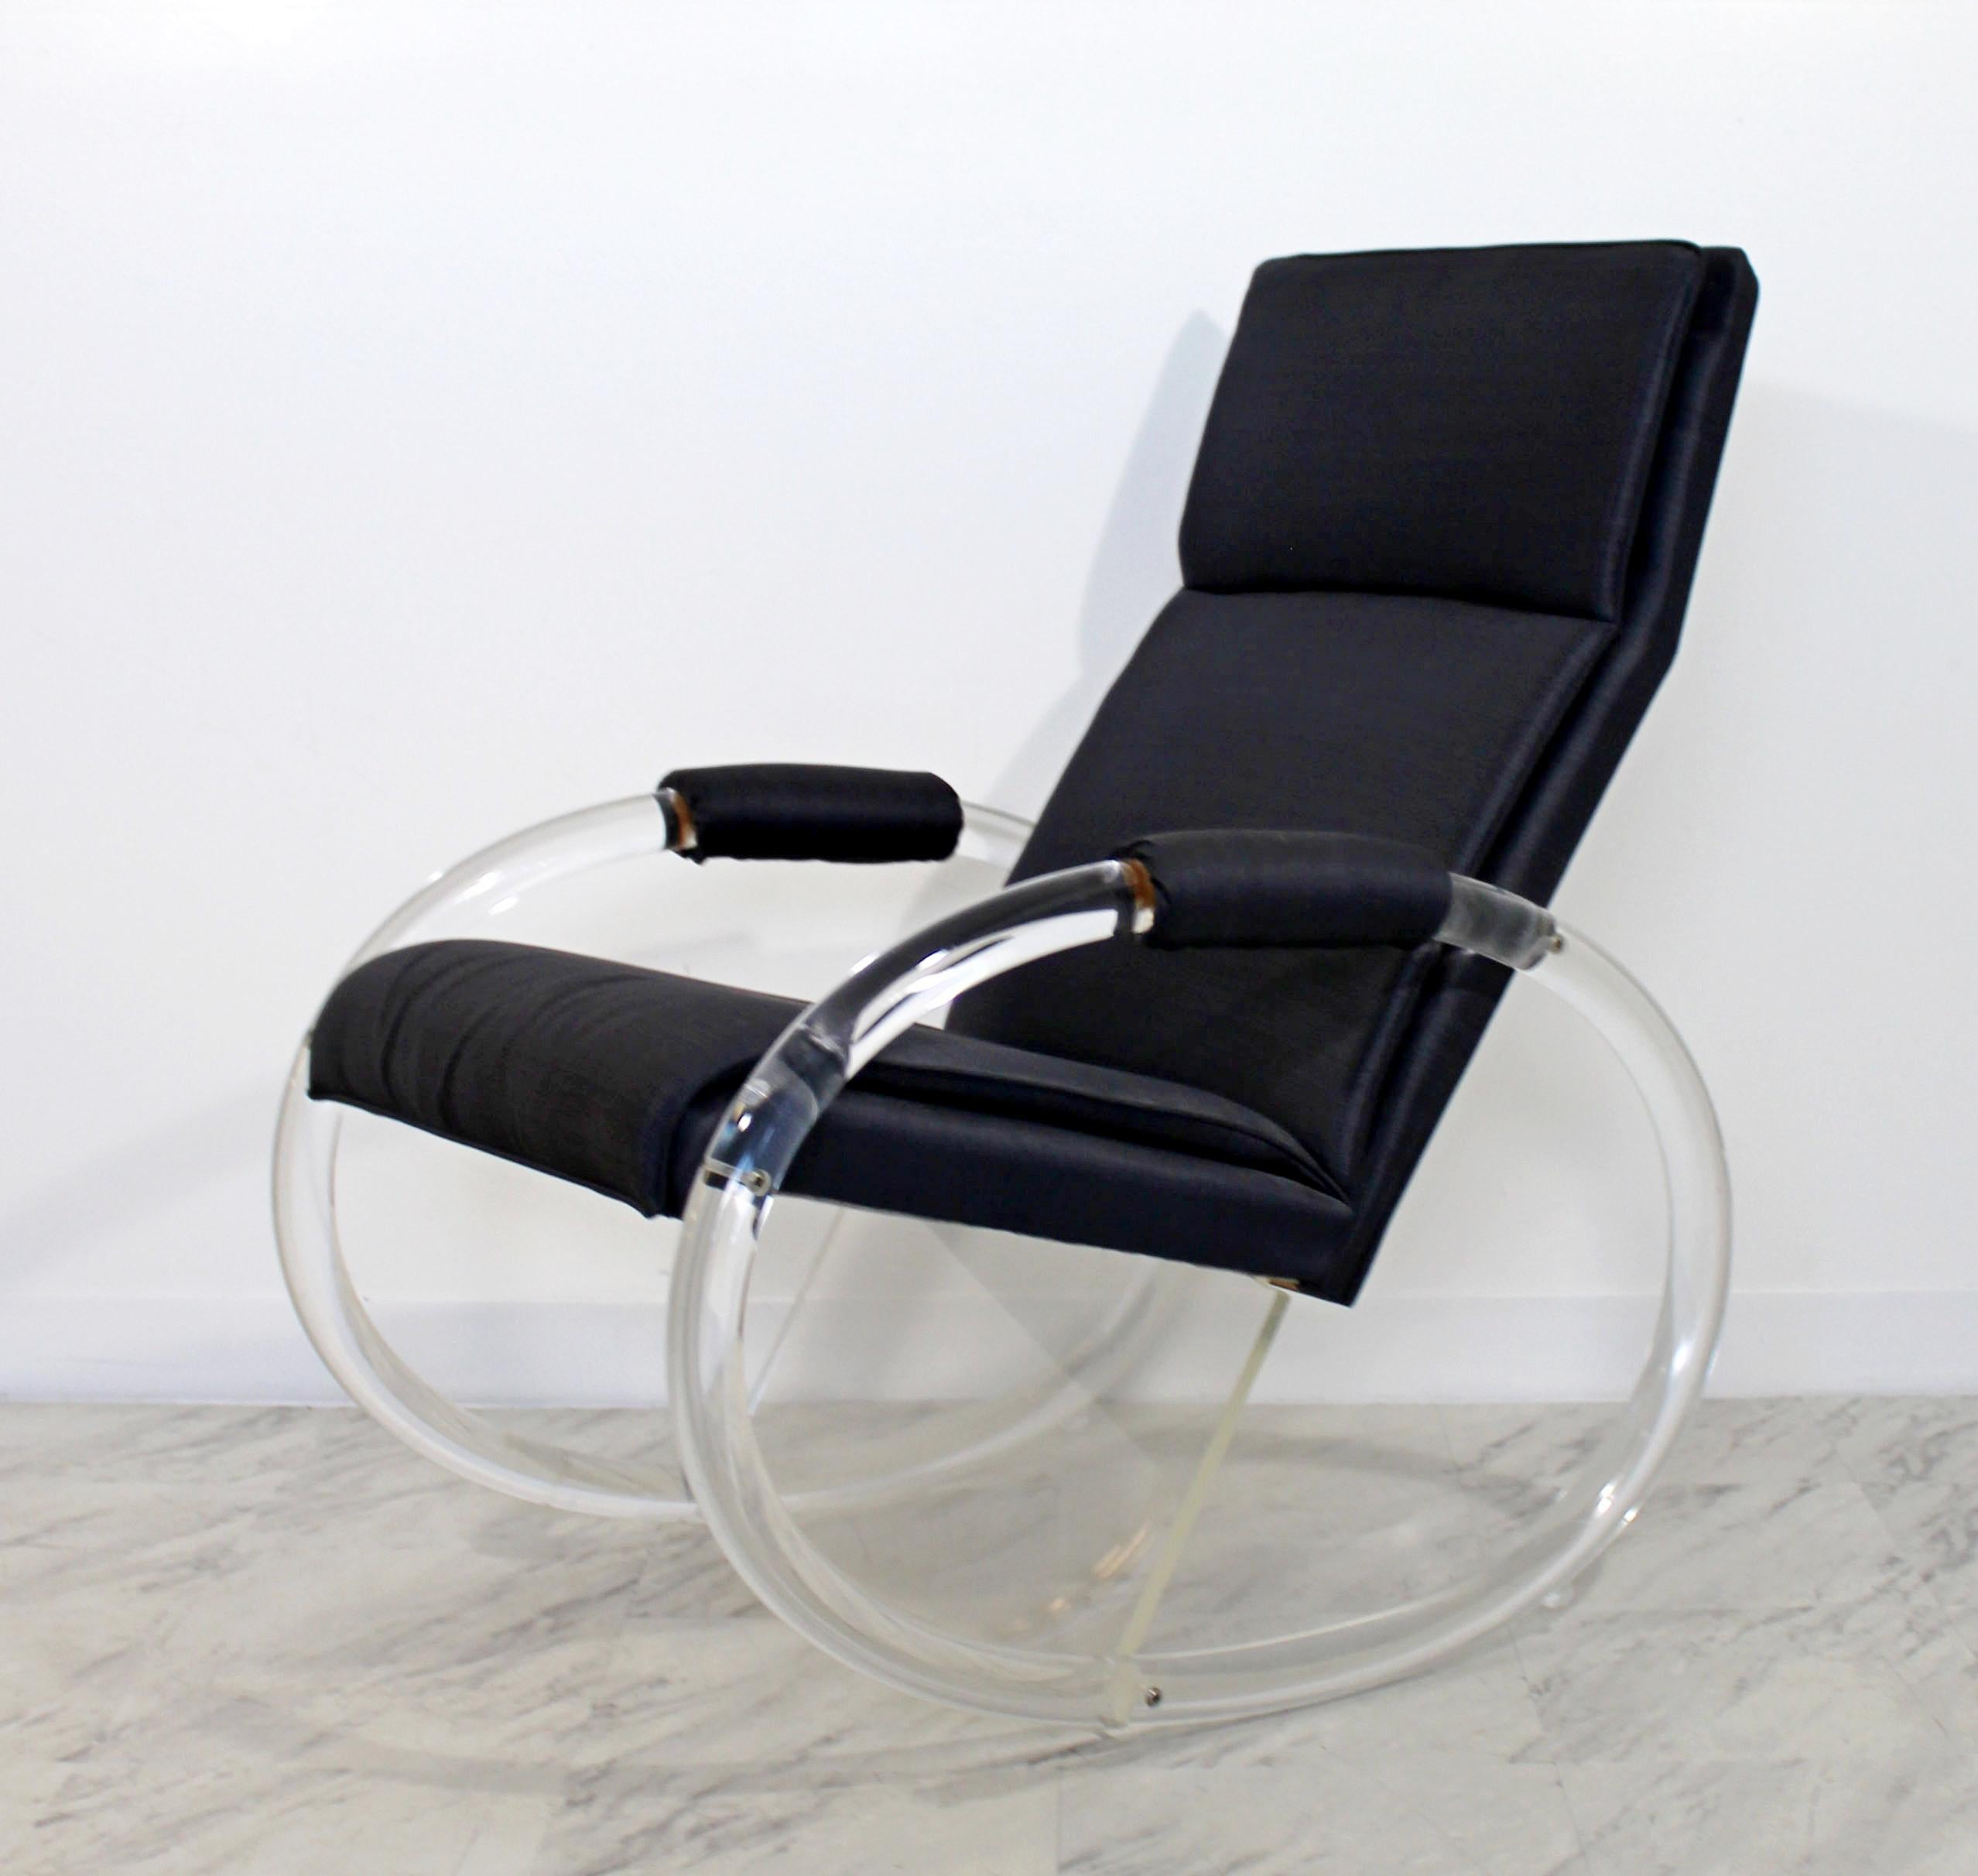 For your consideration is a fabulous, Lucite rocker rocking chair, by Charles Hollis Jones, for Hill Manufacturing, circa the 1970s. In very good condition. The dimensions are 24.5